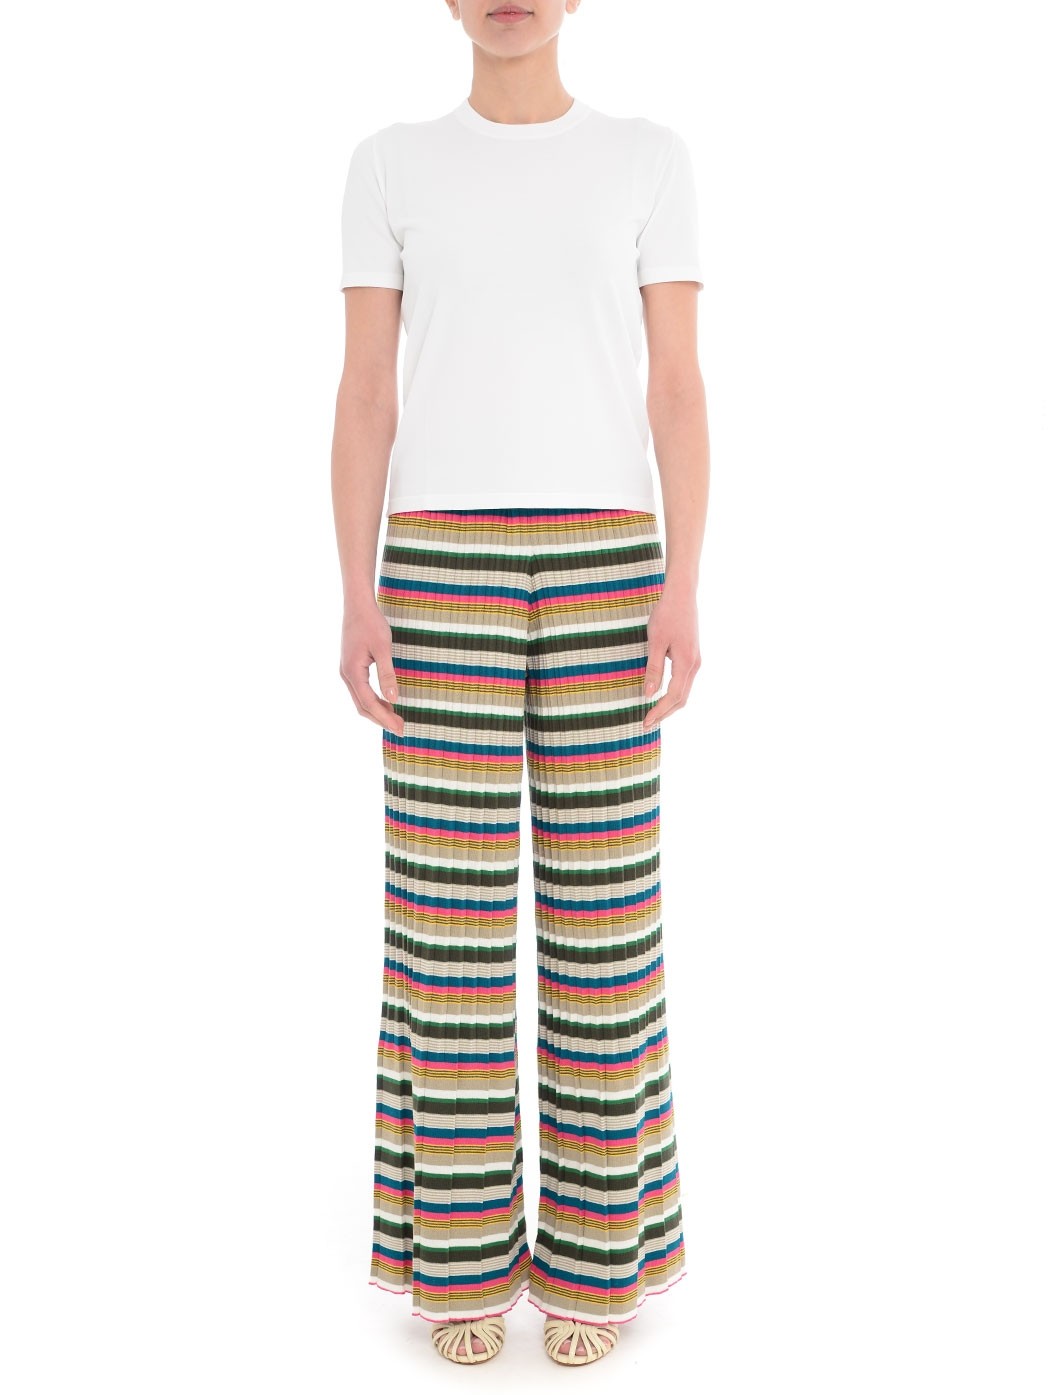  WOMAN TROUSERS,PALAZZO TROUSERS,SKINNY TROUSERS,MARNI TROUSERS,FORTE FORTE TROUSERS,8PM TROUSERS,MSGM TROUSERS,CROP PANTS  SEMICOUTURE S3SA22